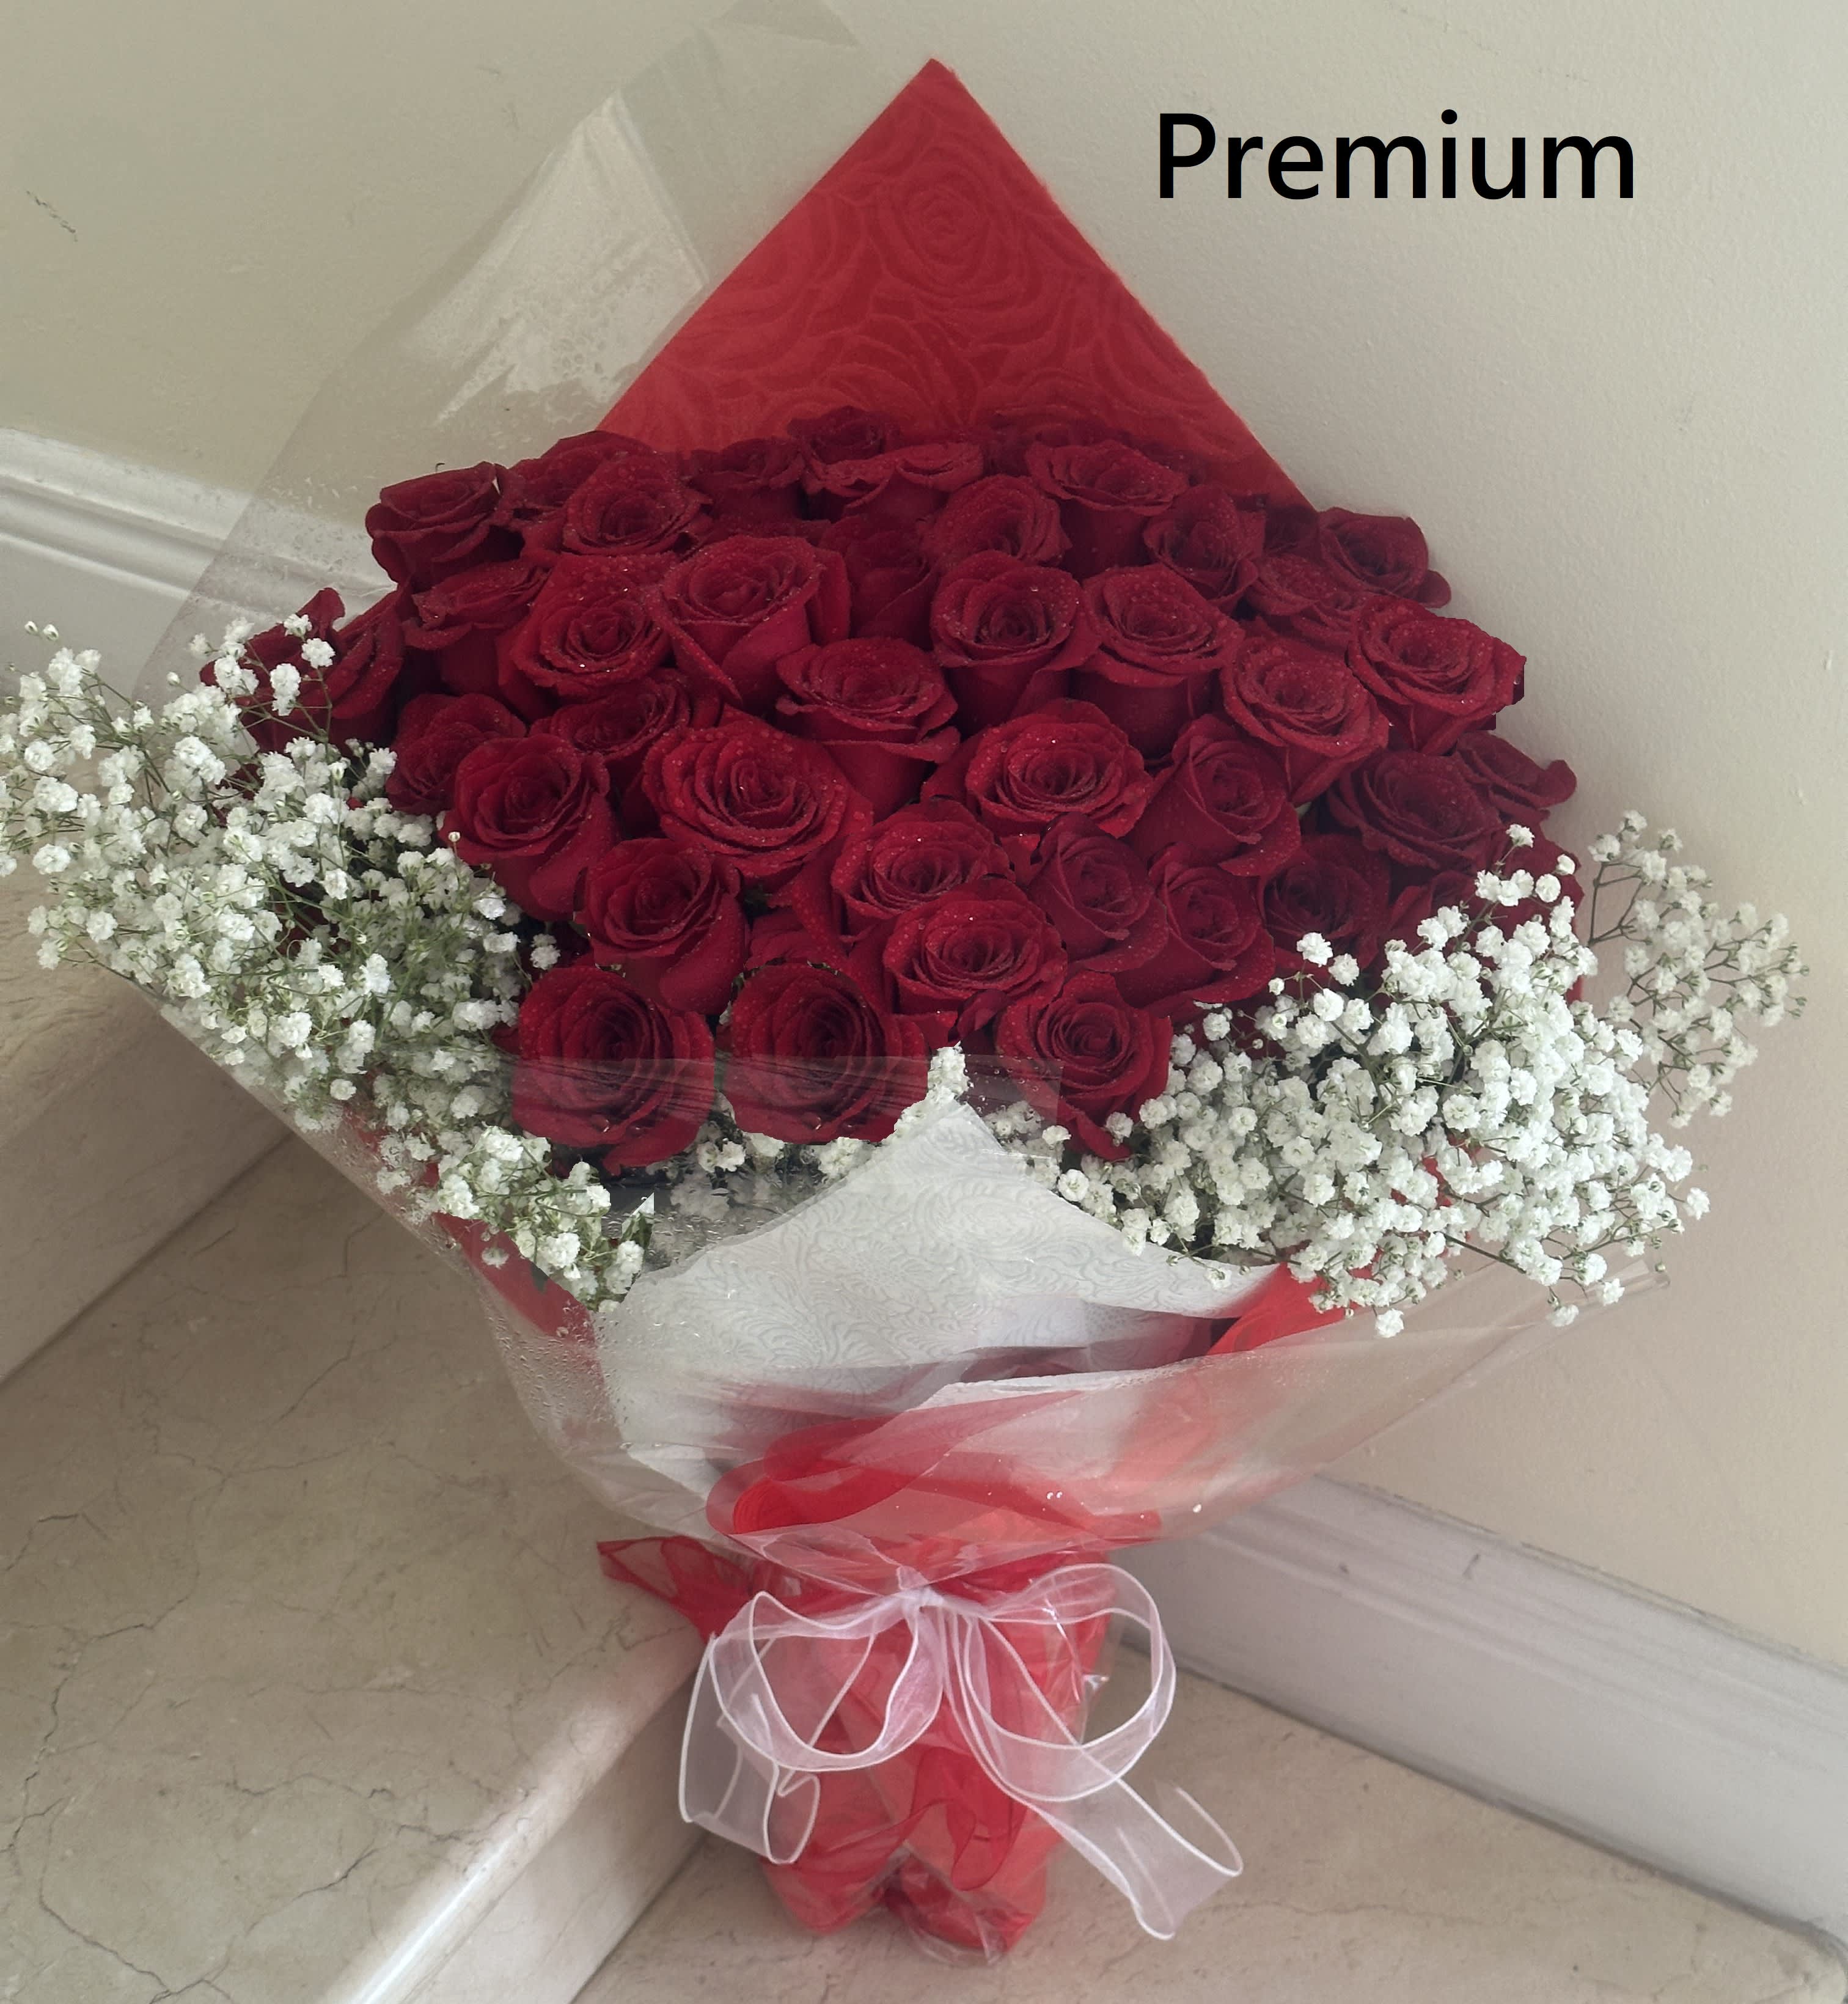 36 Long Stem Red Roses wrapped with Tissue and/or Cellophane paper with a Bow. - 36 Long Stem Red Roses wrapped with Tissue and/or Cellophane paper with a Bow. Beautifully arranged with a skirt of White Baby Breath and Greens.